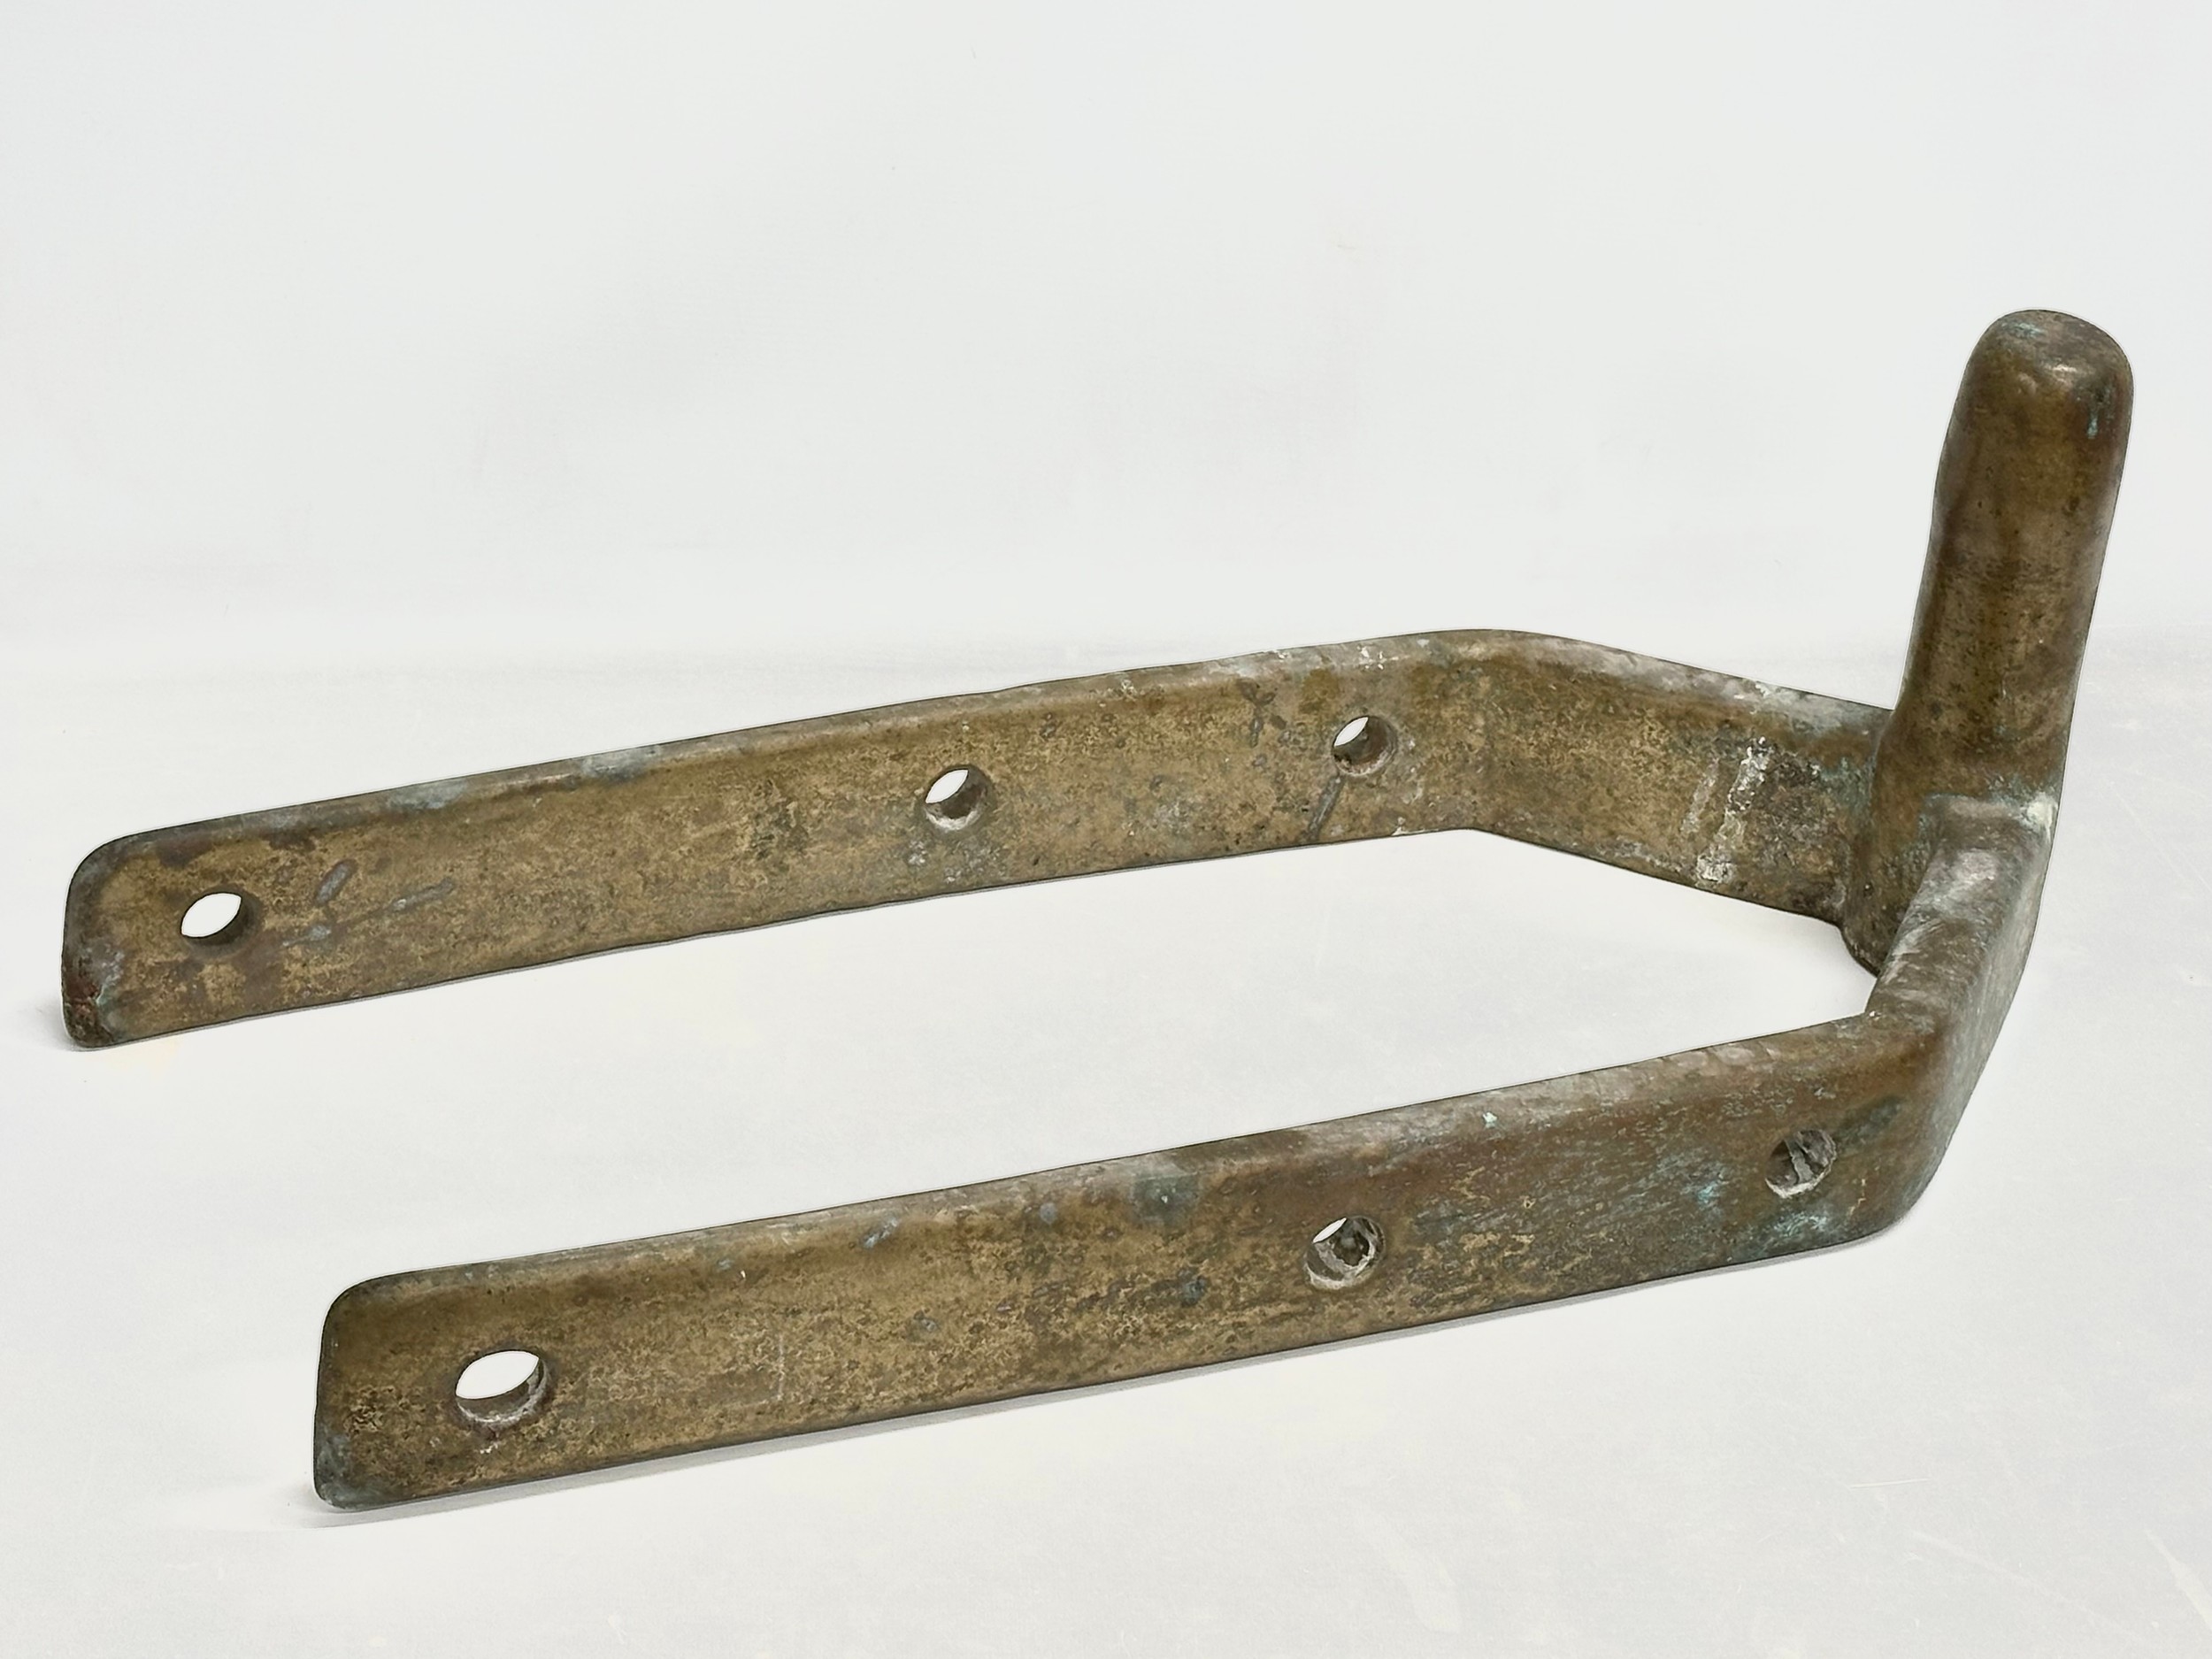 Two 16th Century bronze Gudgeons reportedly from a Spanish Galleon, 71x33x27cm - Image 6 of 7